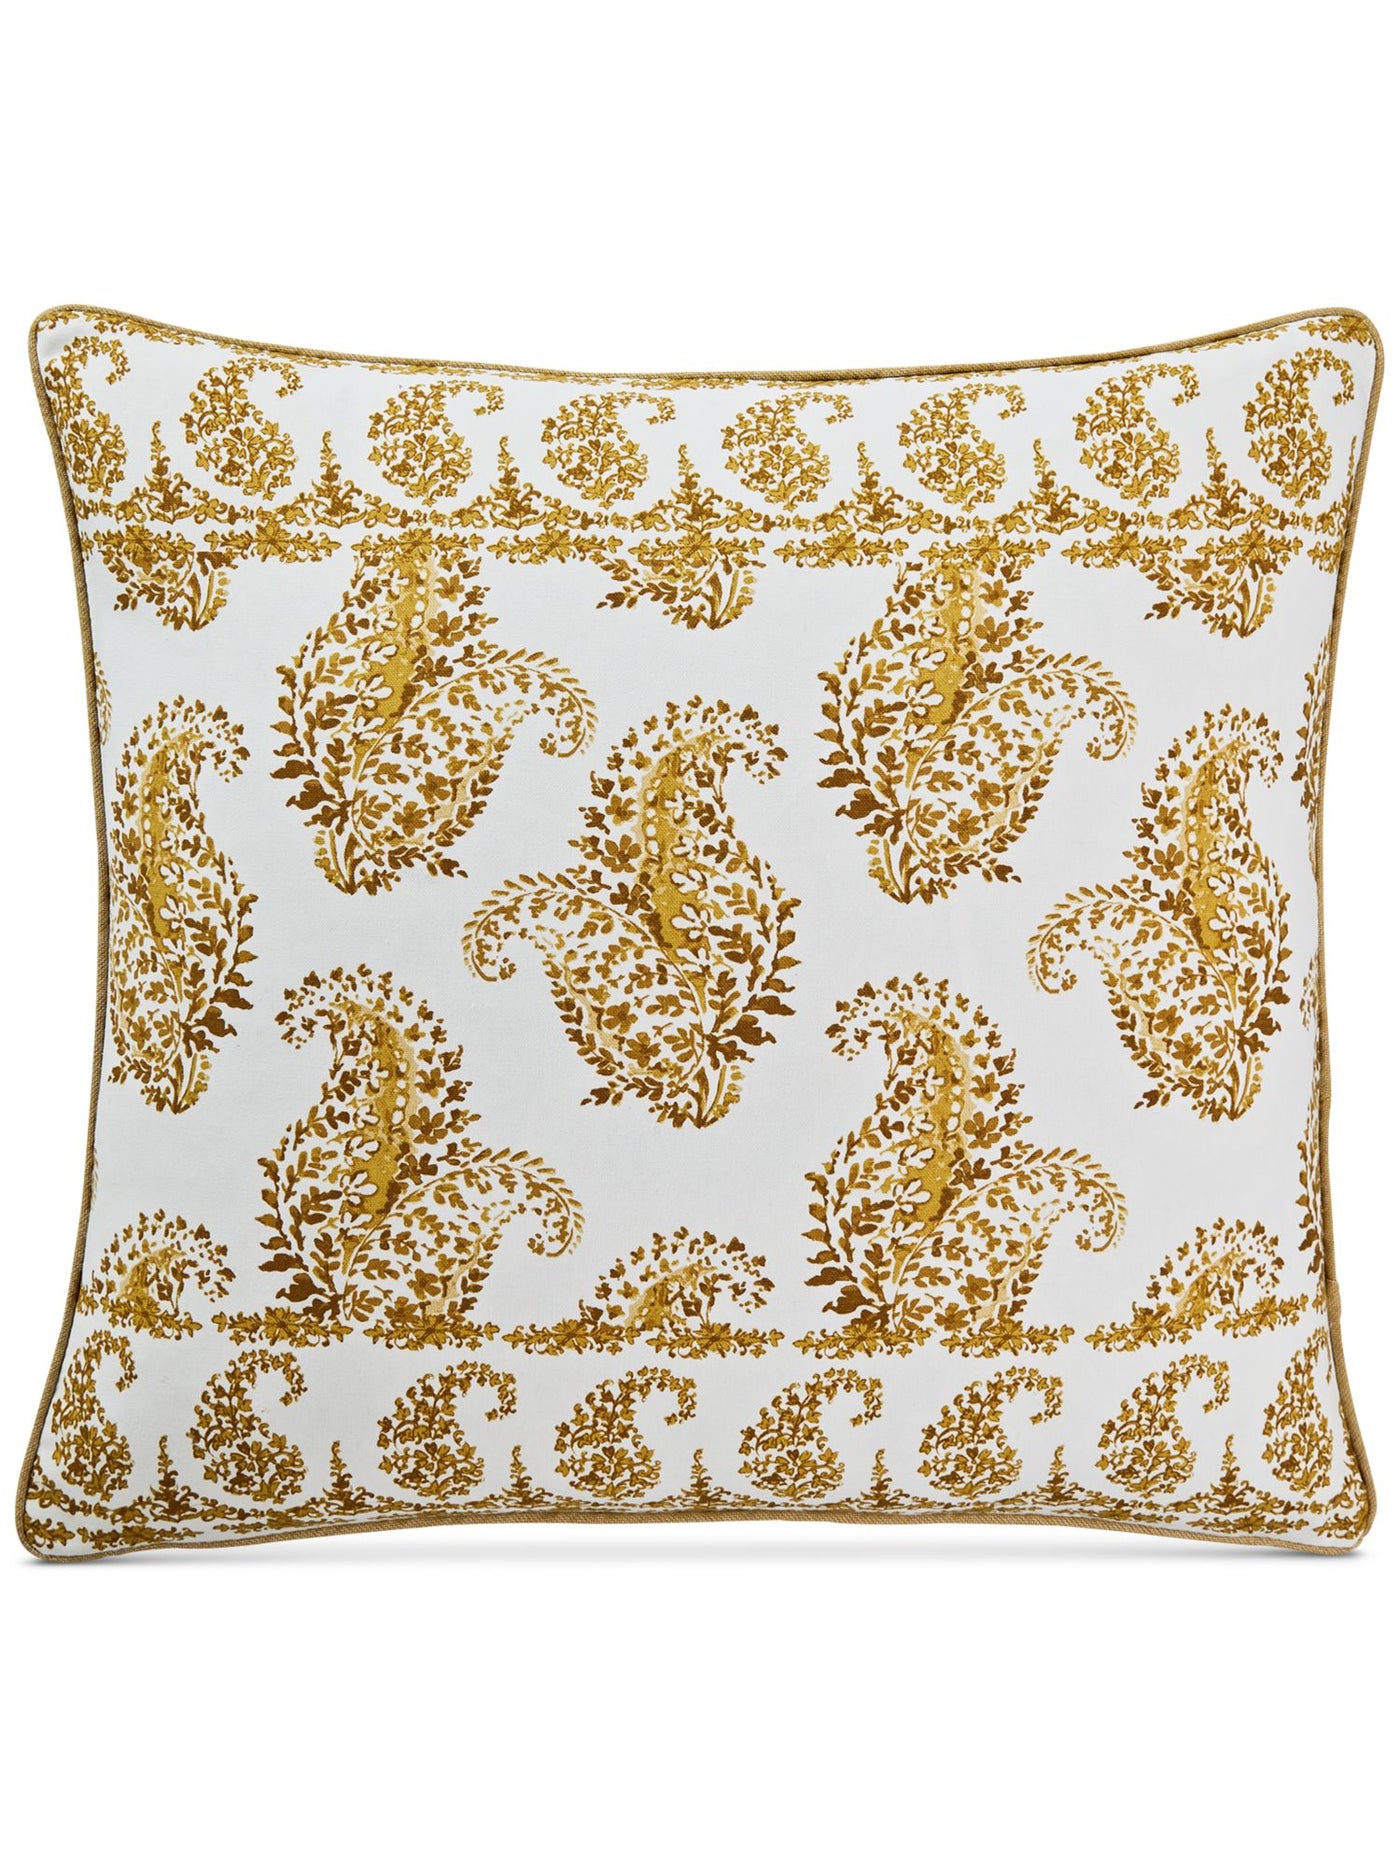 LACOURTE Gold Patterned 20 x 20 in Decorative Pillow